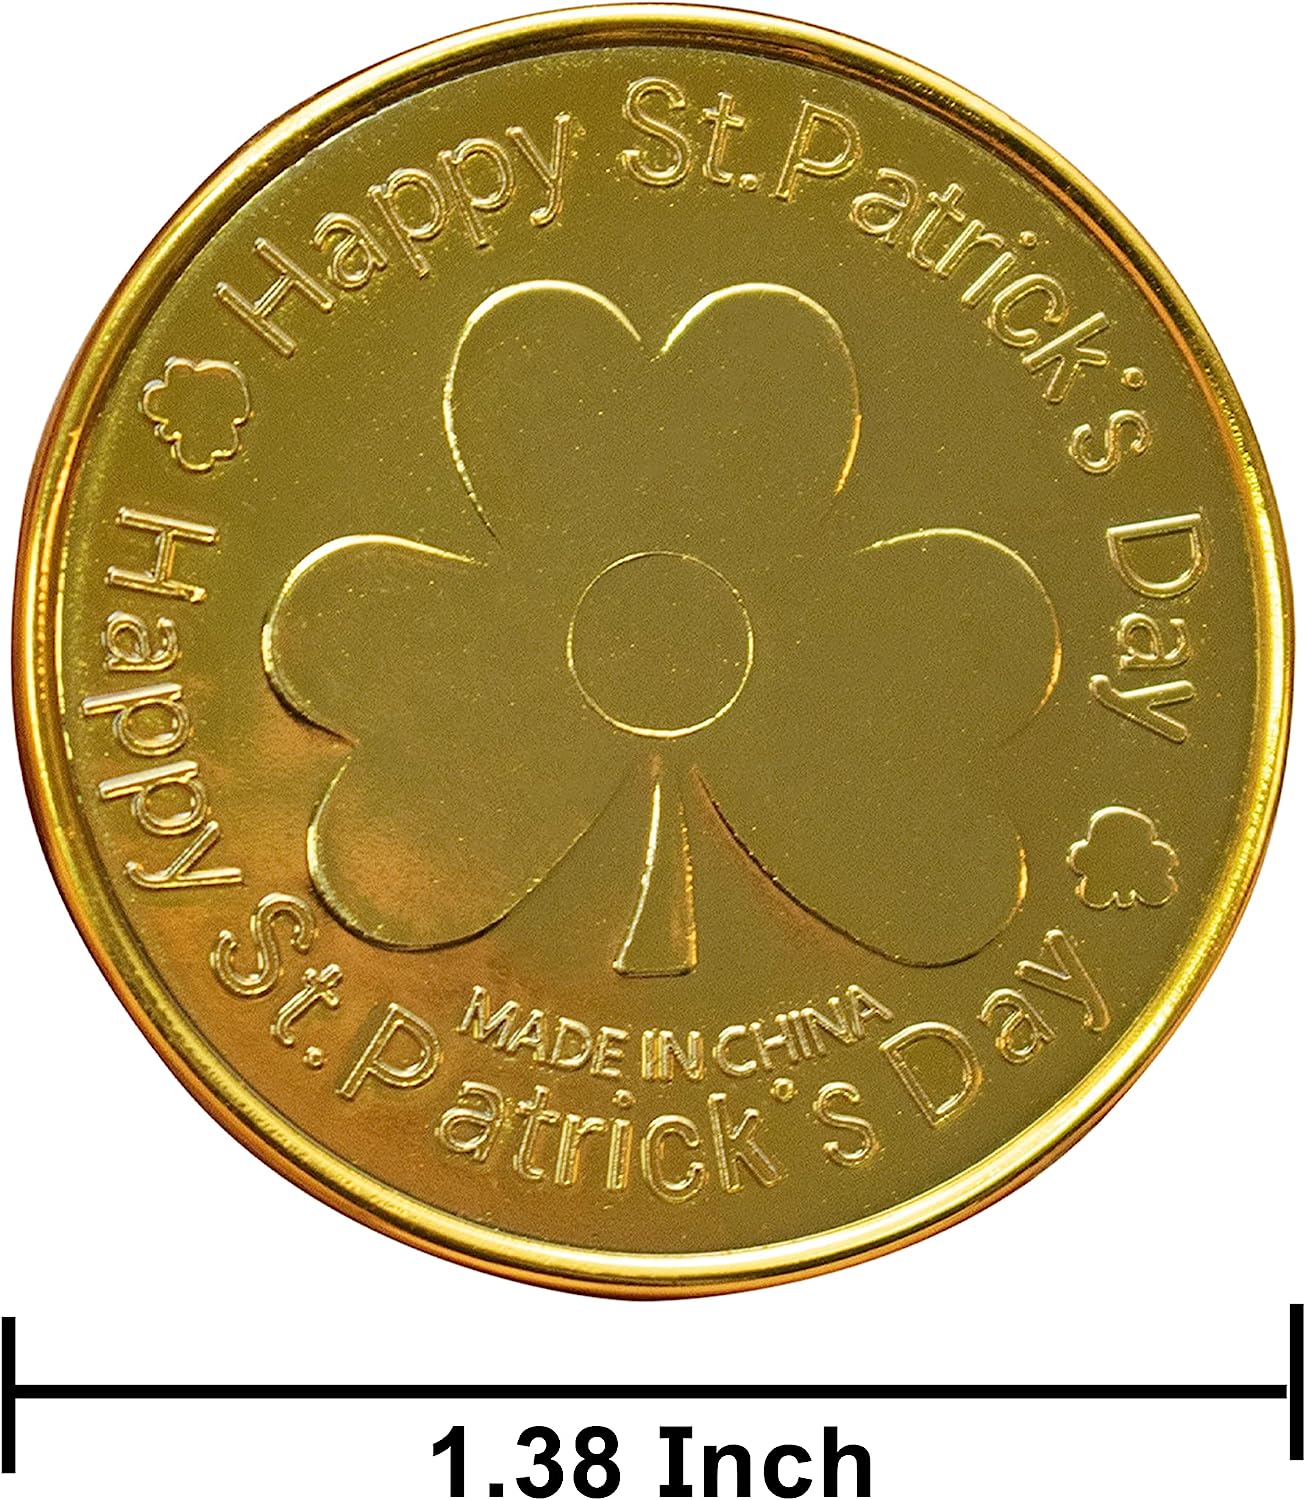 GIFTEXPRESS 144pcs St. Patrick’s Lucky Coins Green and Gold Shamrock Coins